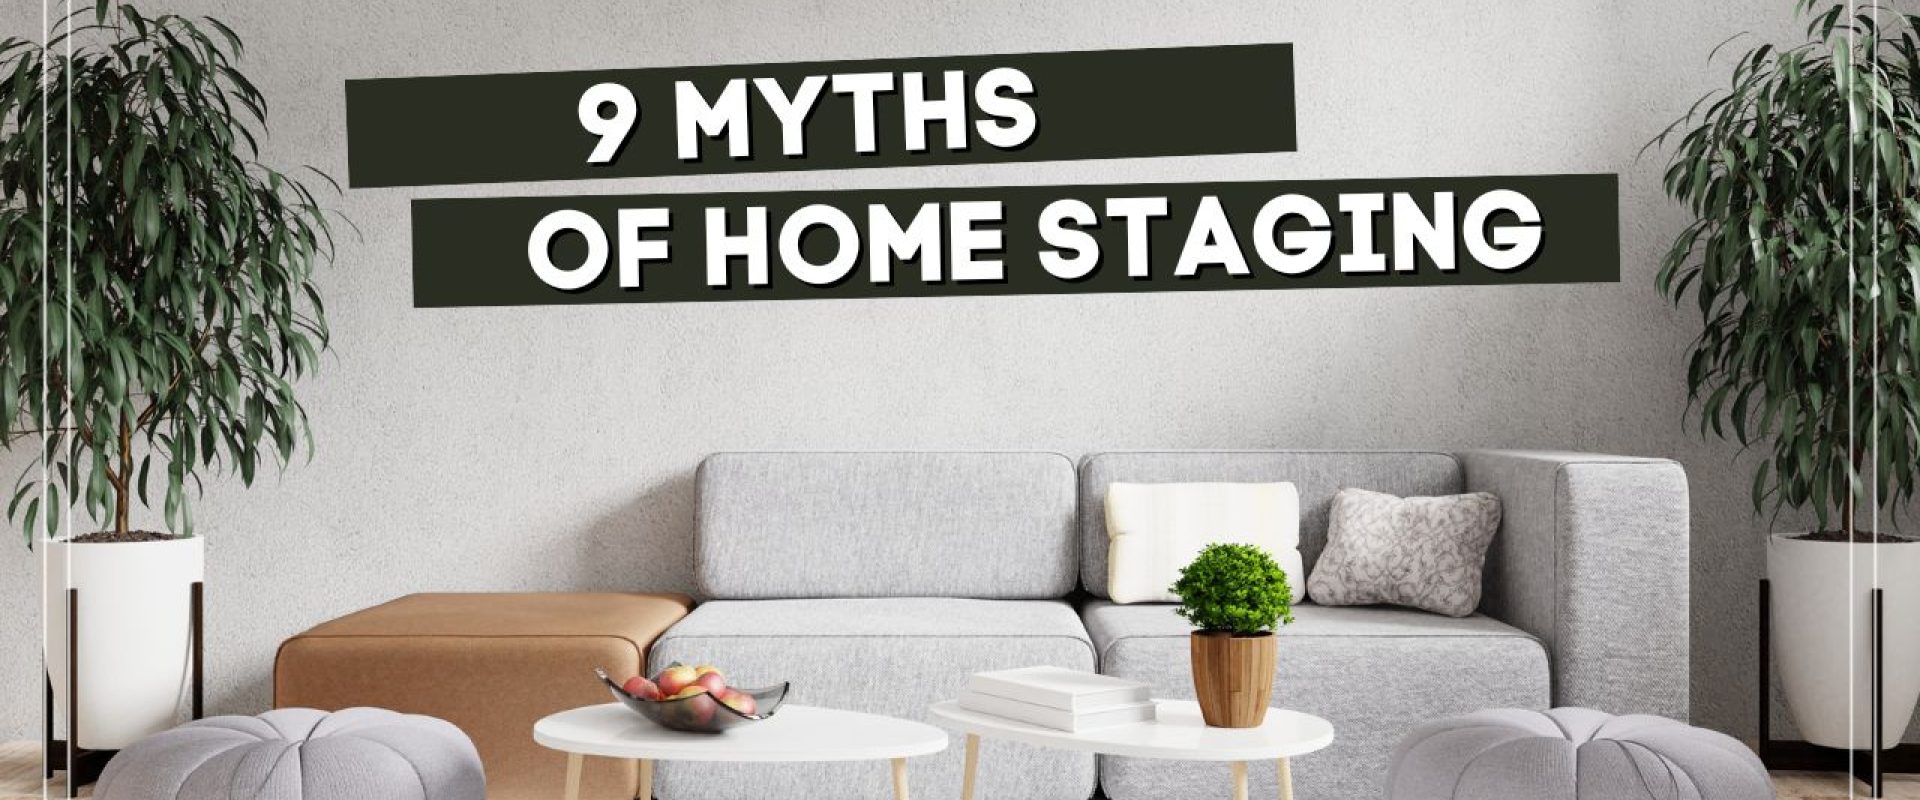 9 Myths of Home Staging